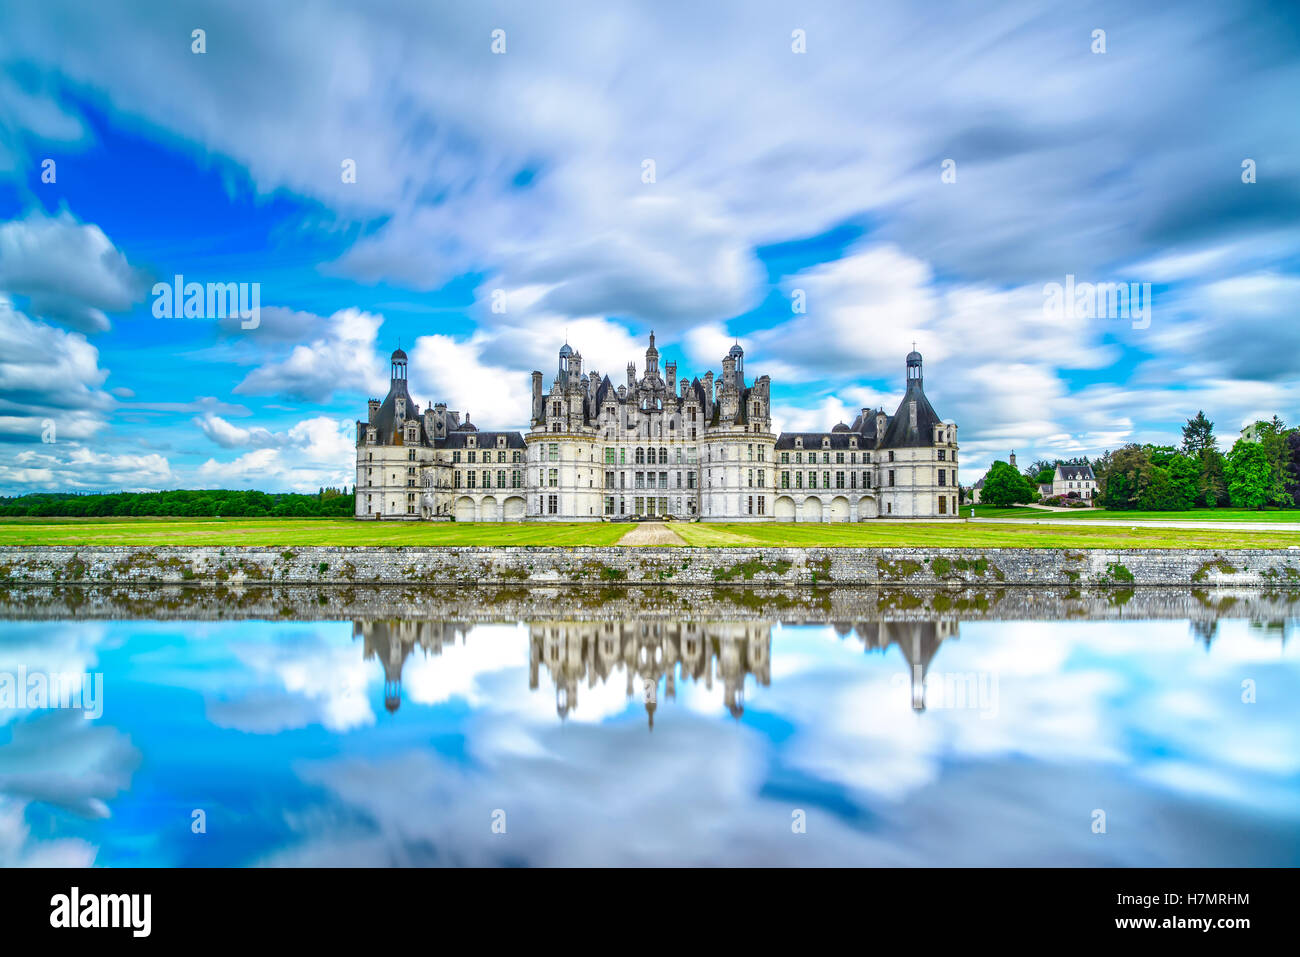 Chateau de Chambord, royal medieval french castle and reflection. Loire Valley, France, Europe. Unesco heritage site. Stock Photo